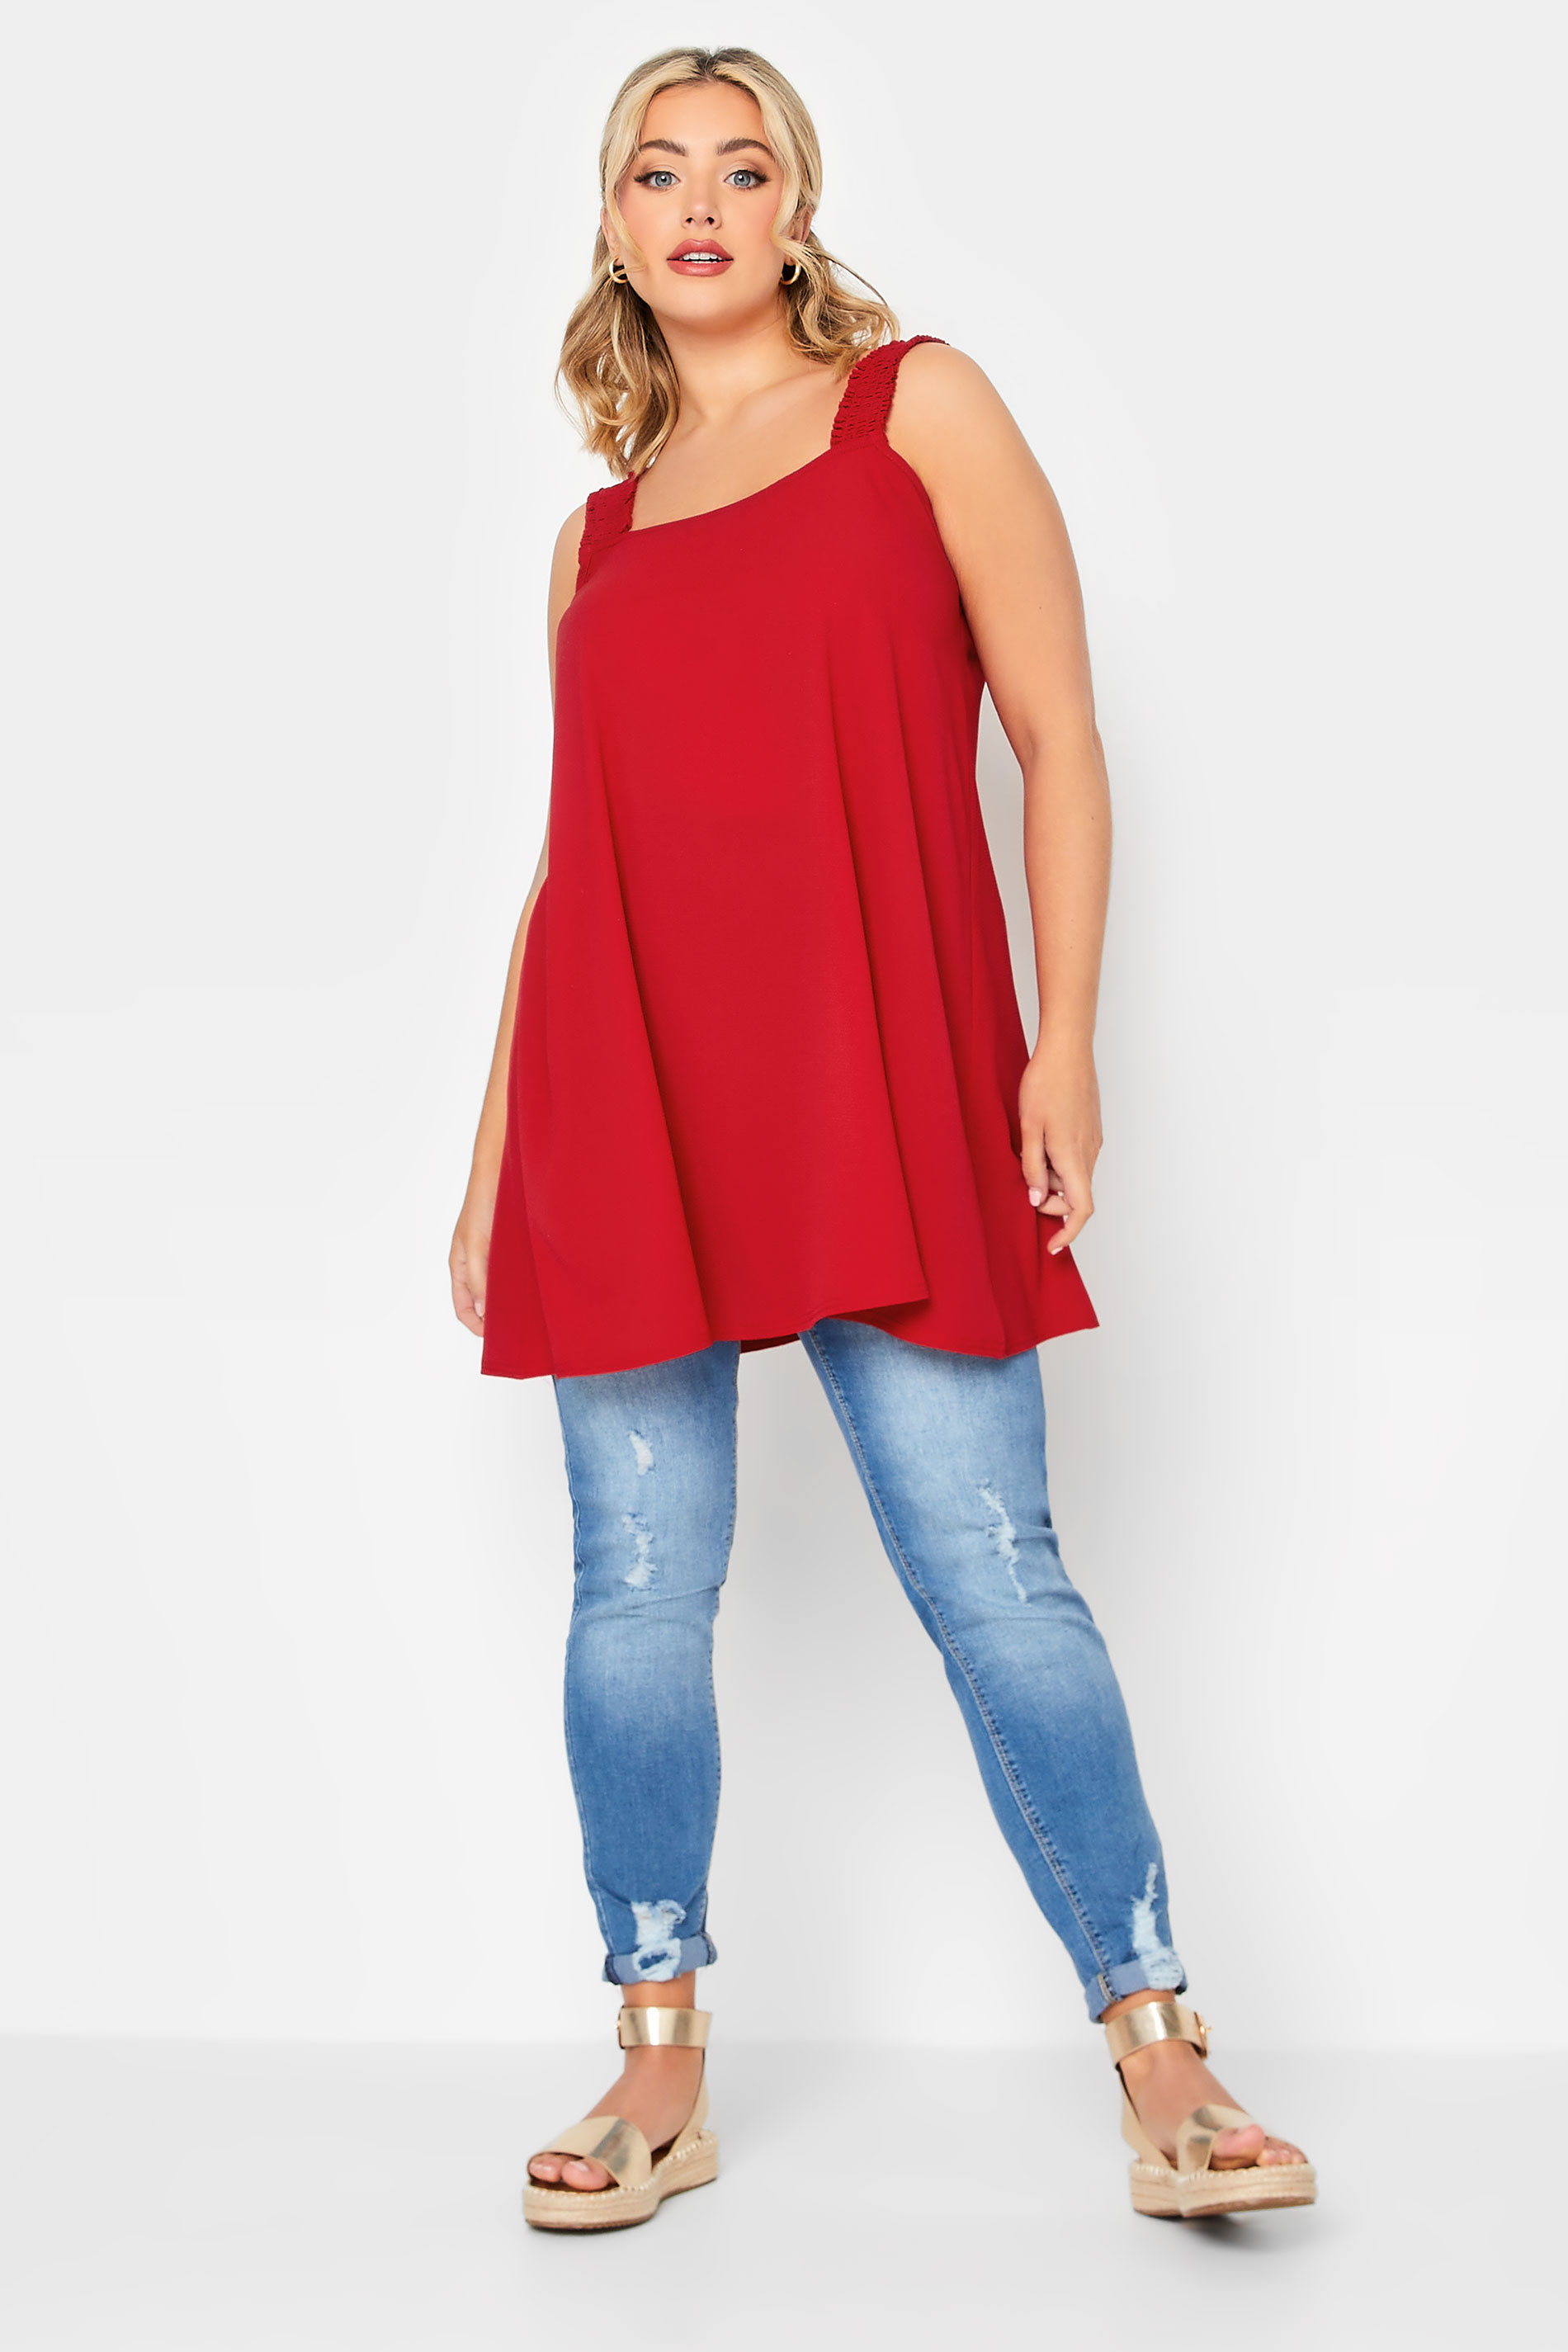 LIMITED COLLECTION Curve Plus Size Red Shirred Strap Cami Vest Top | Yours Clothing  2